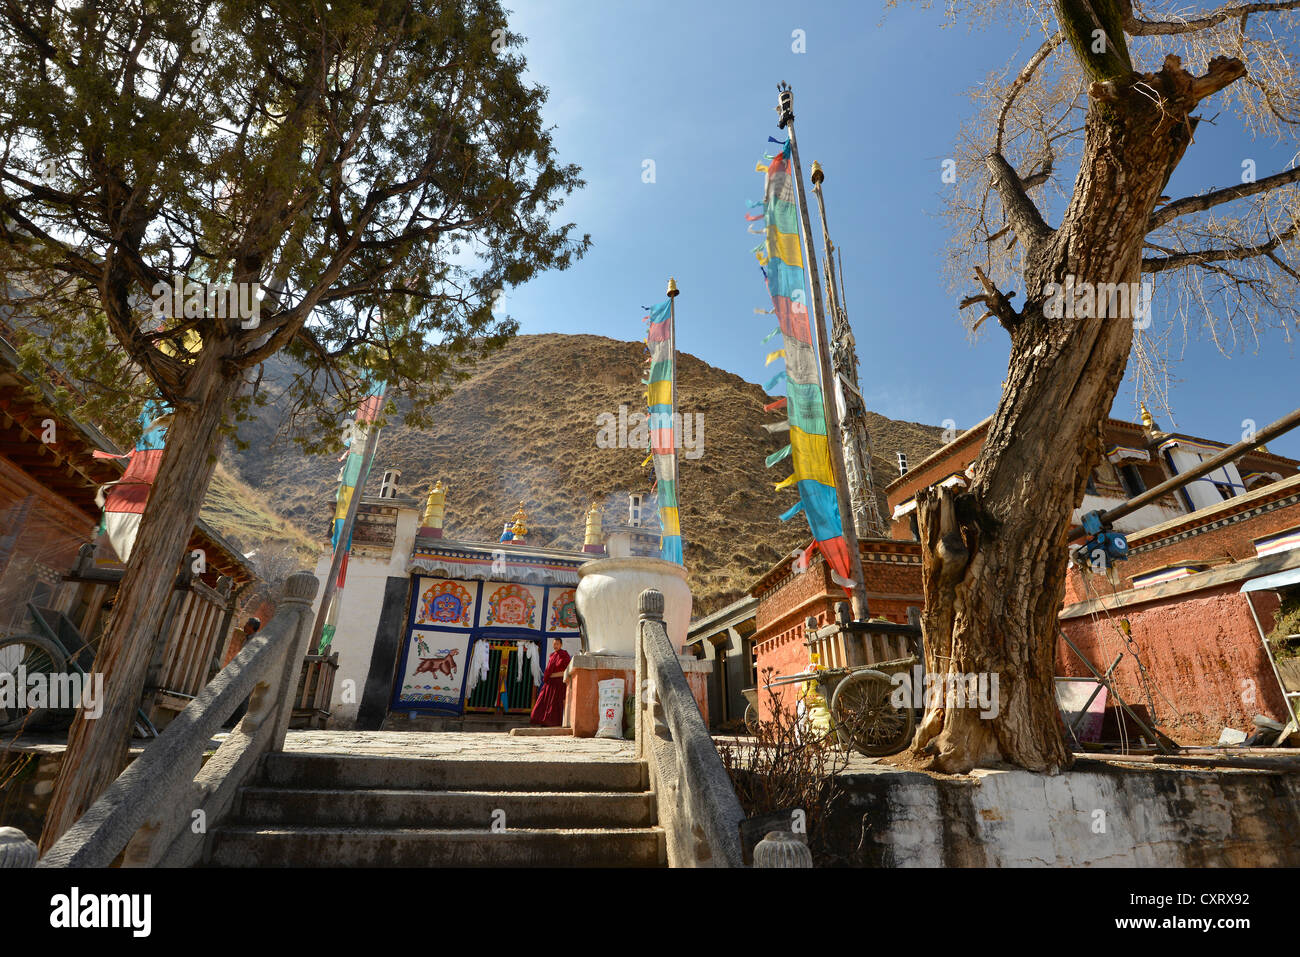 Tibetan Buddhism, stupa and monastery buildings with prayer flags built in the traditional architectural style Stock Photo